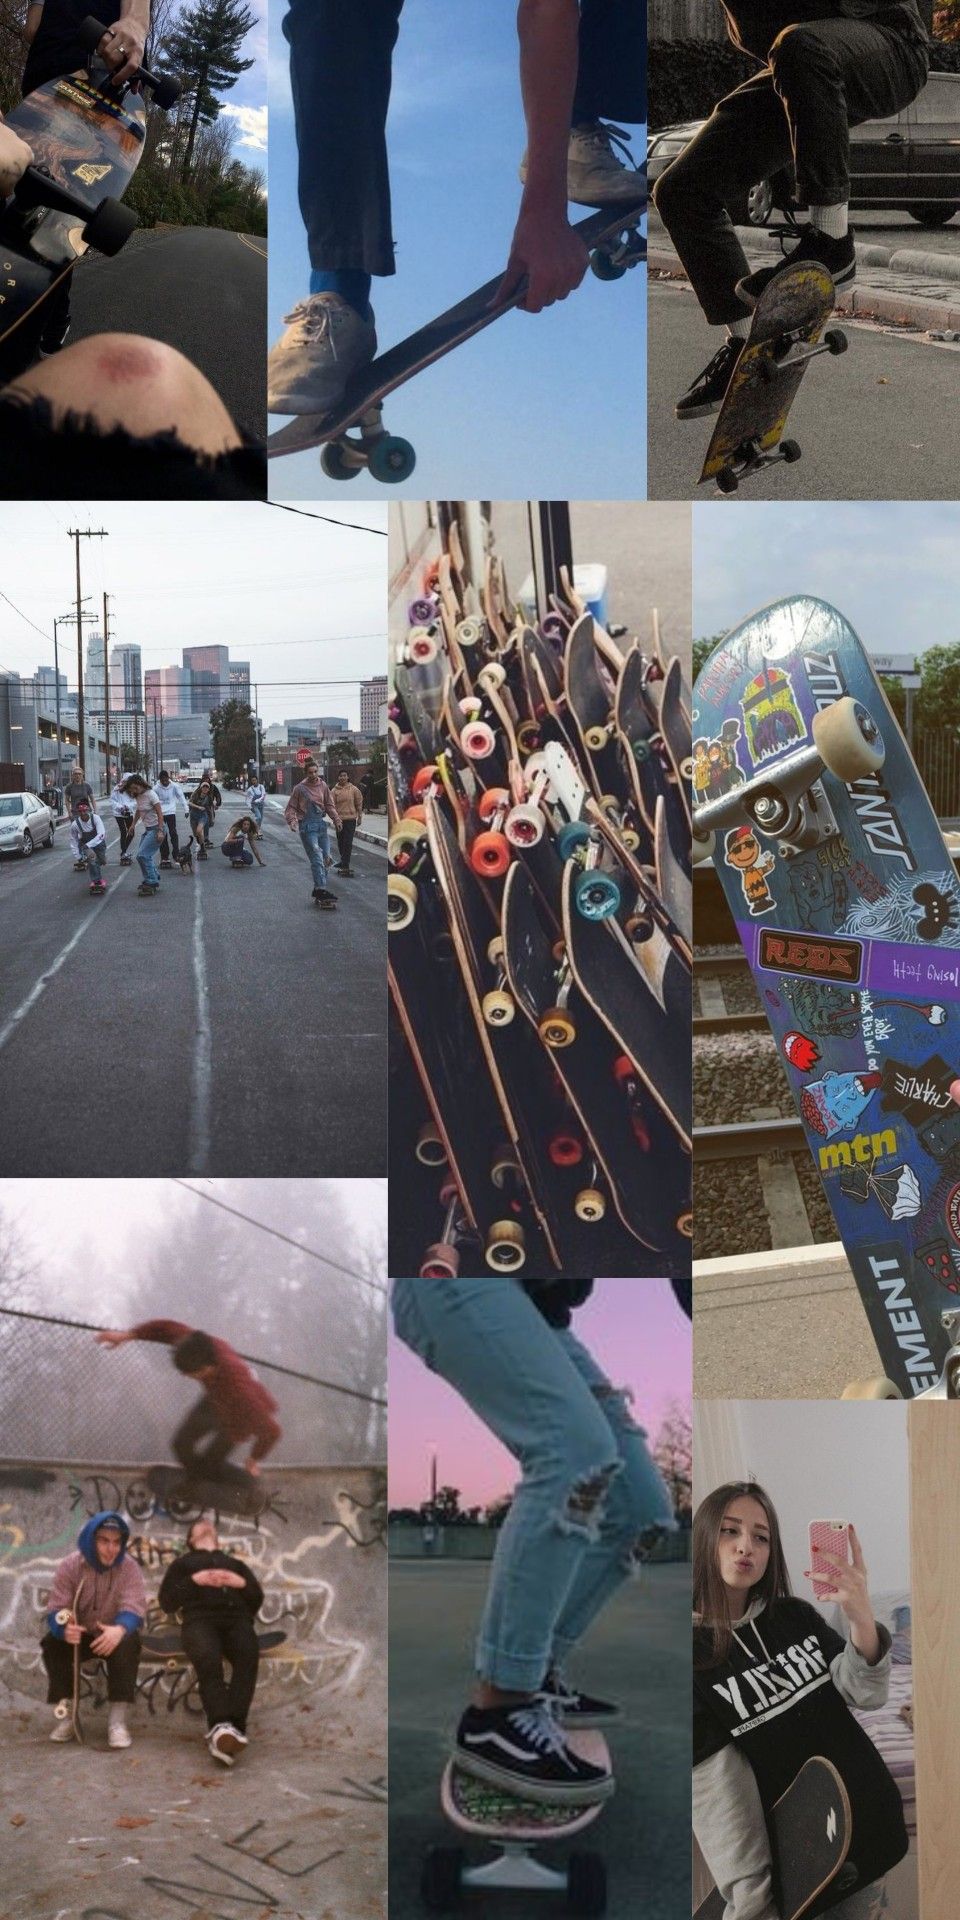 A collage of pictures showing skateboarders doing tricks - Skate, skater